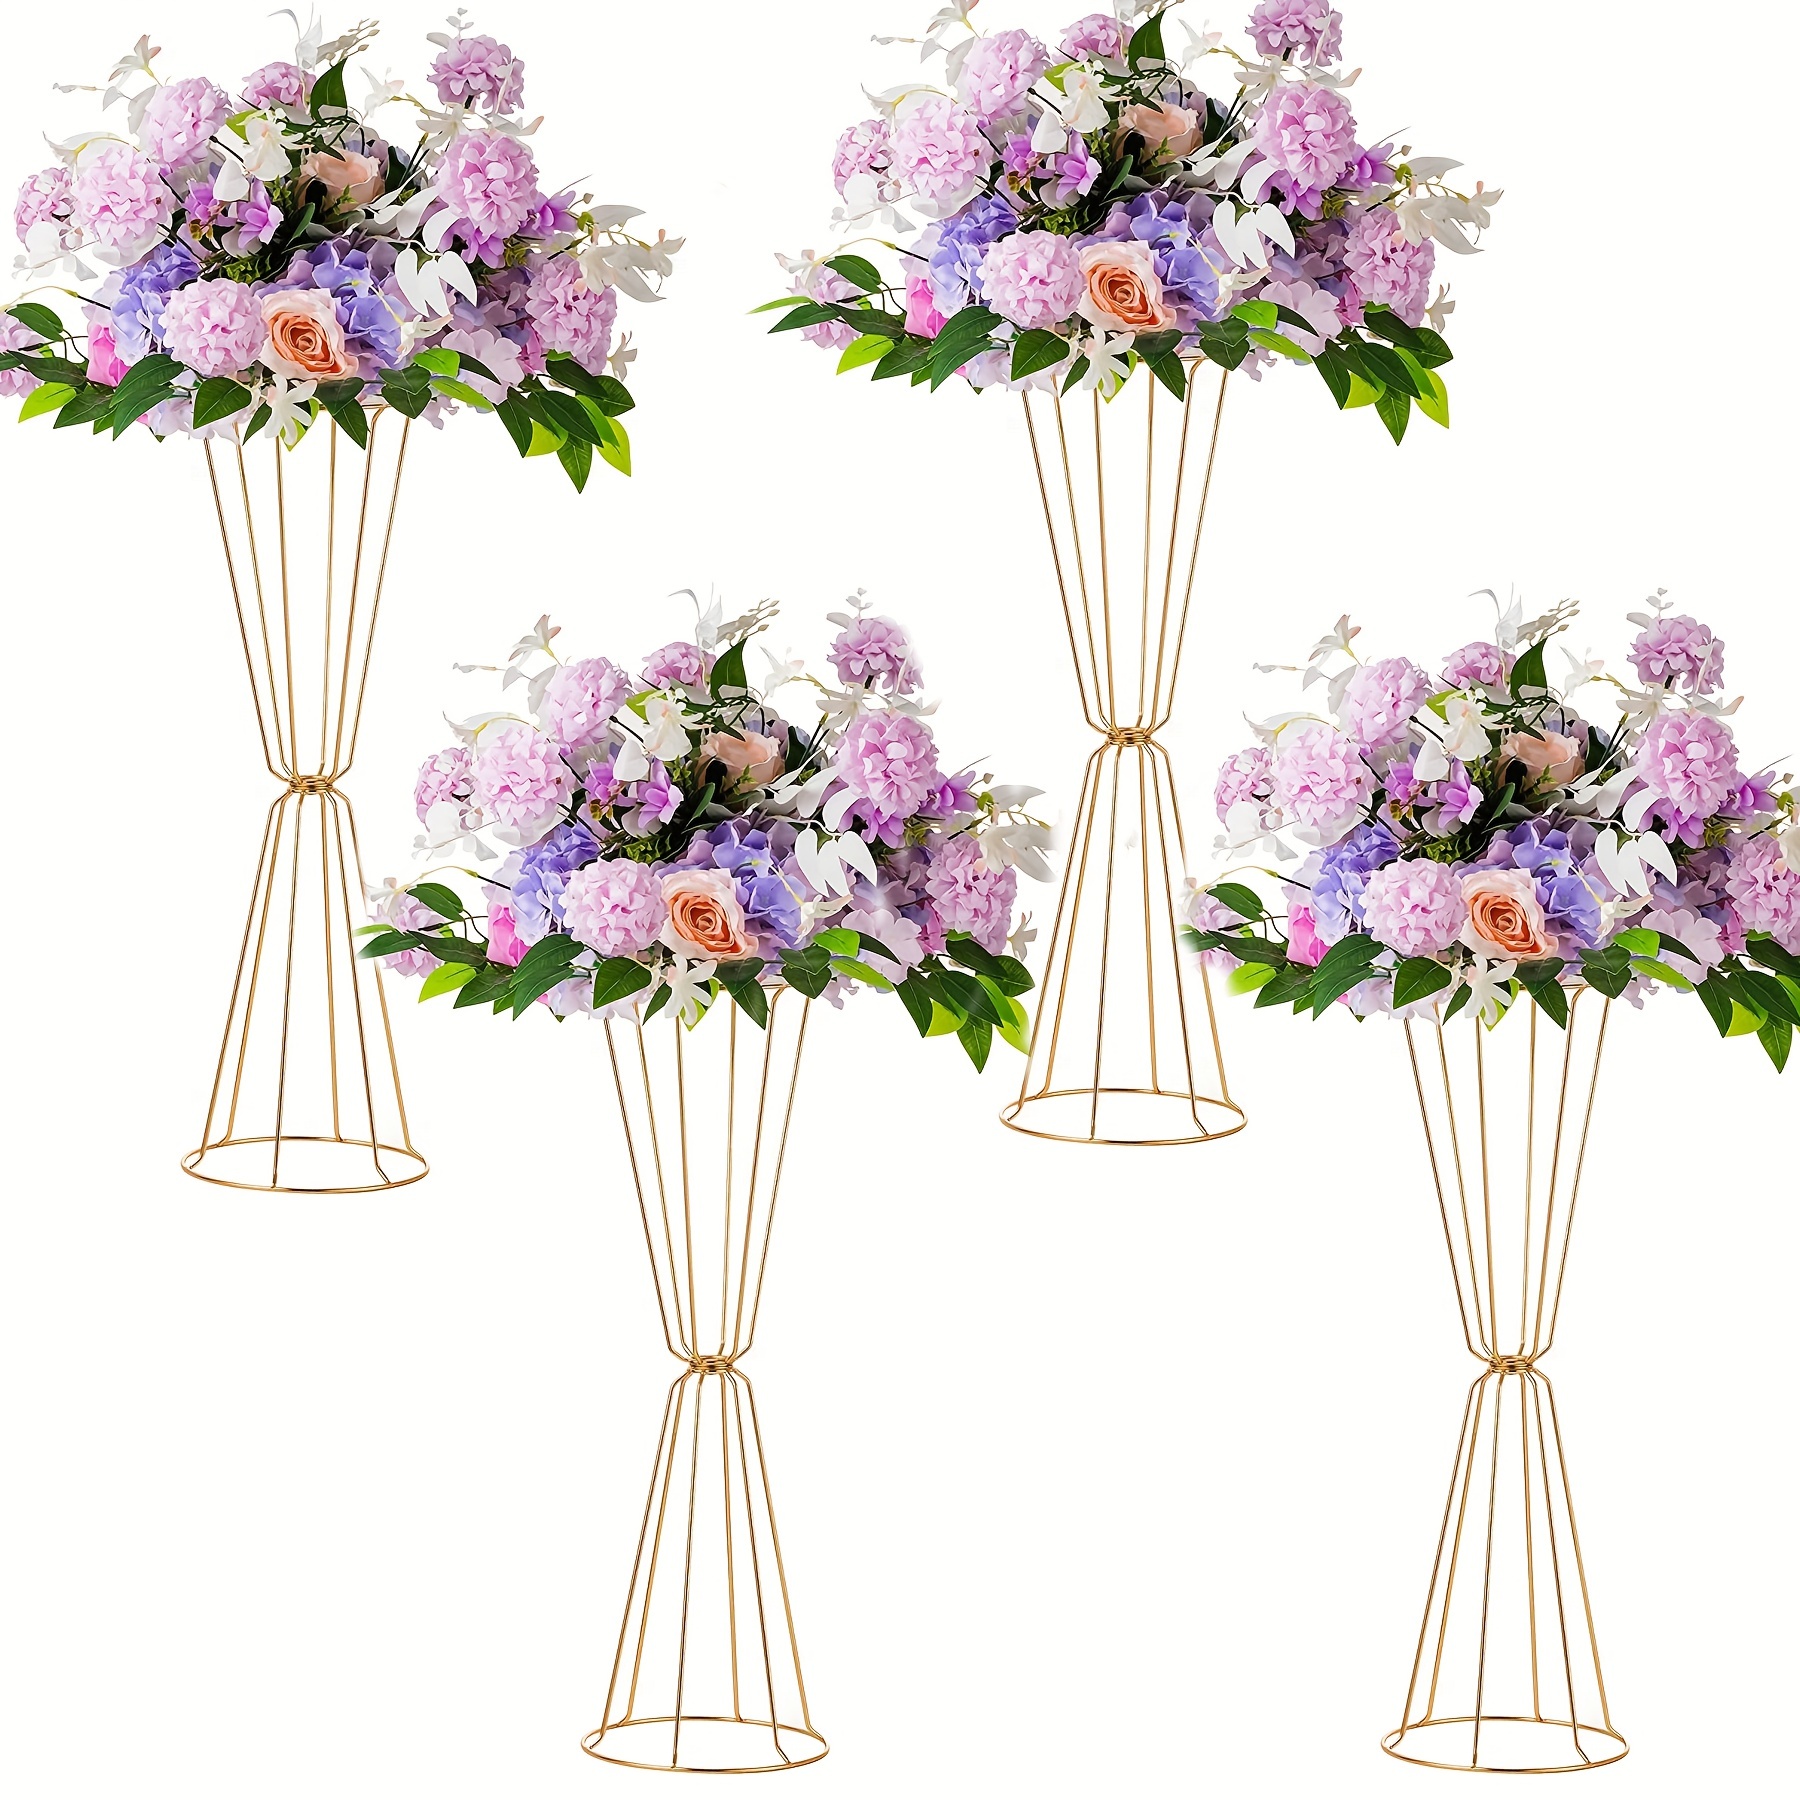 

Set, Golden Geometric Centerpieces For Table - Set Of 4 Metal Flower Stand For Wedding, 23.6in Tall Vases For Centerpiece Table Decorations, Wedding Reception Vases Flower Rack For Party, Aisle, Home